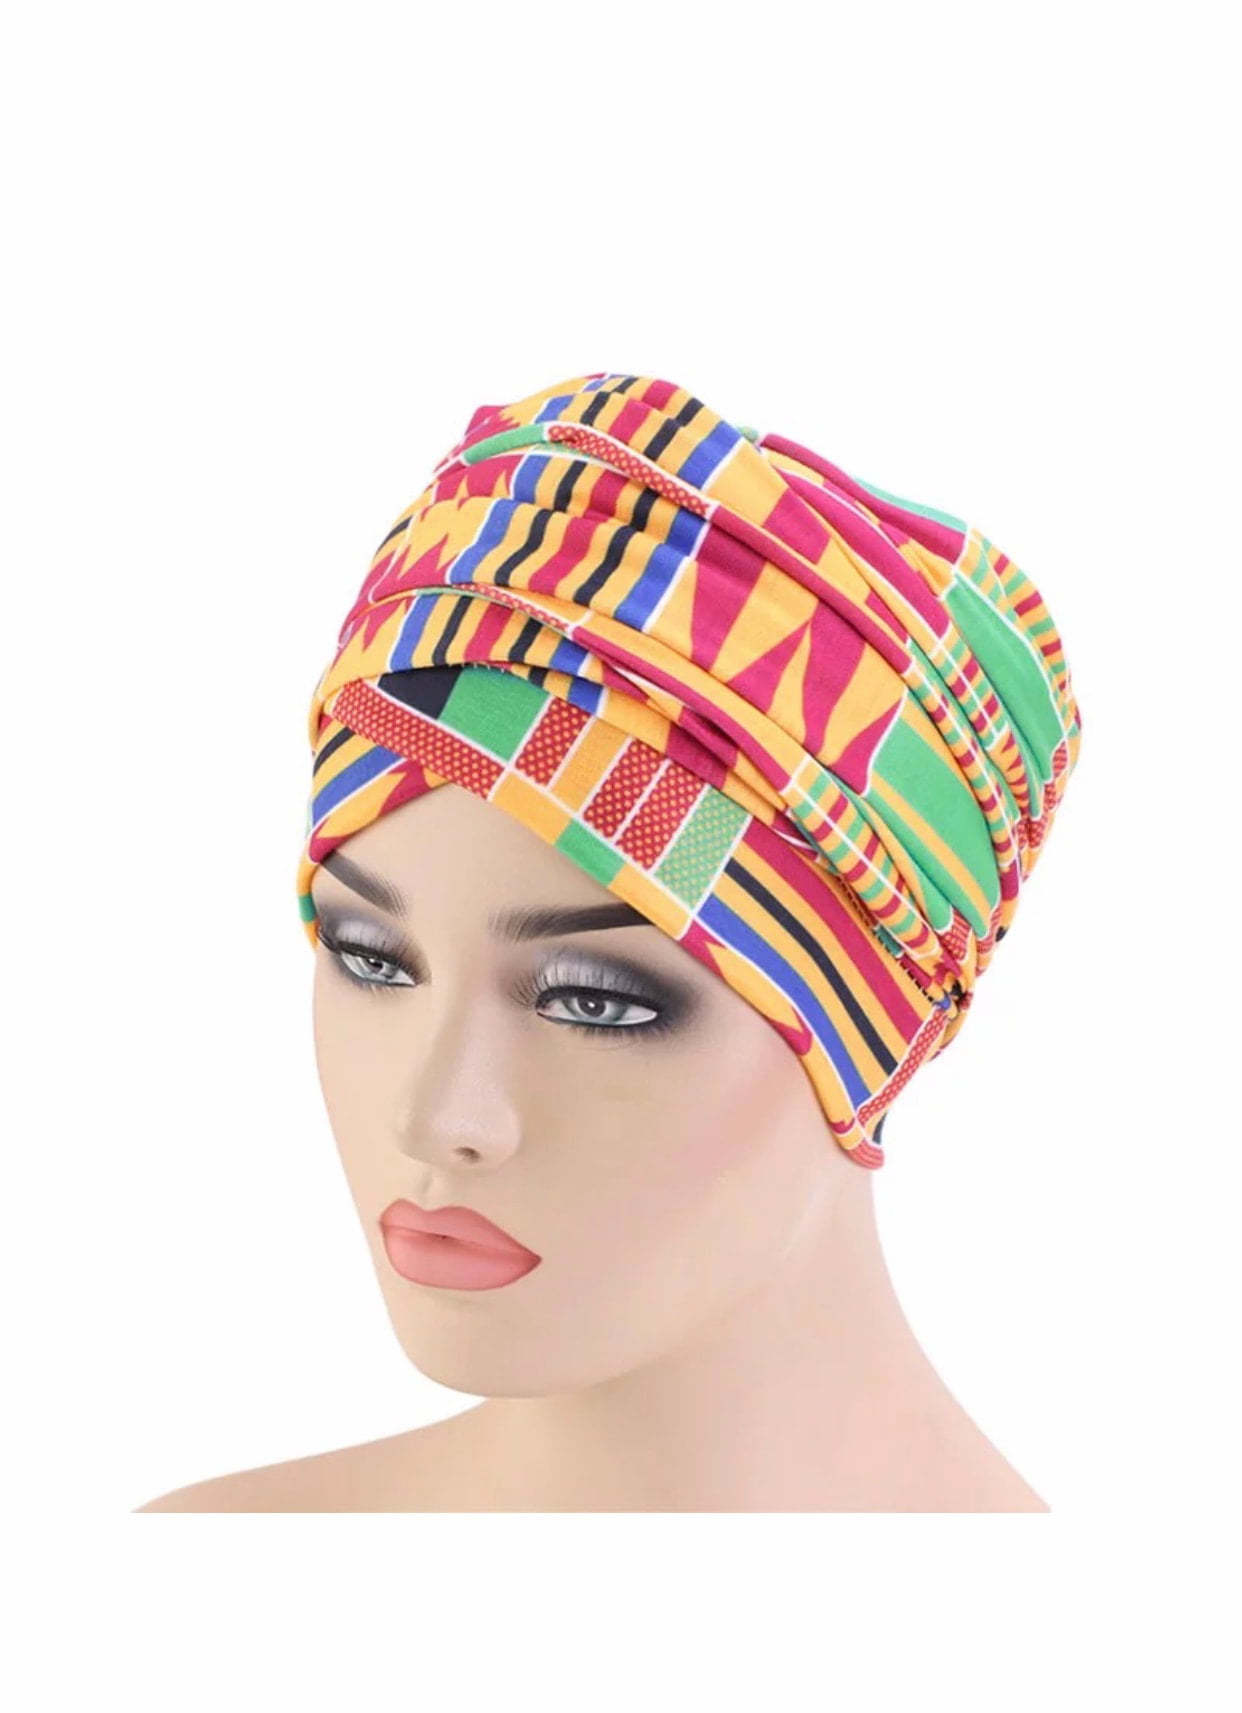 Ankara Style Women's Turban, Head Wrap, African Style Scarf, Muslim Hijab,  Indian Hair Cover, for Teens, Adults 